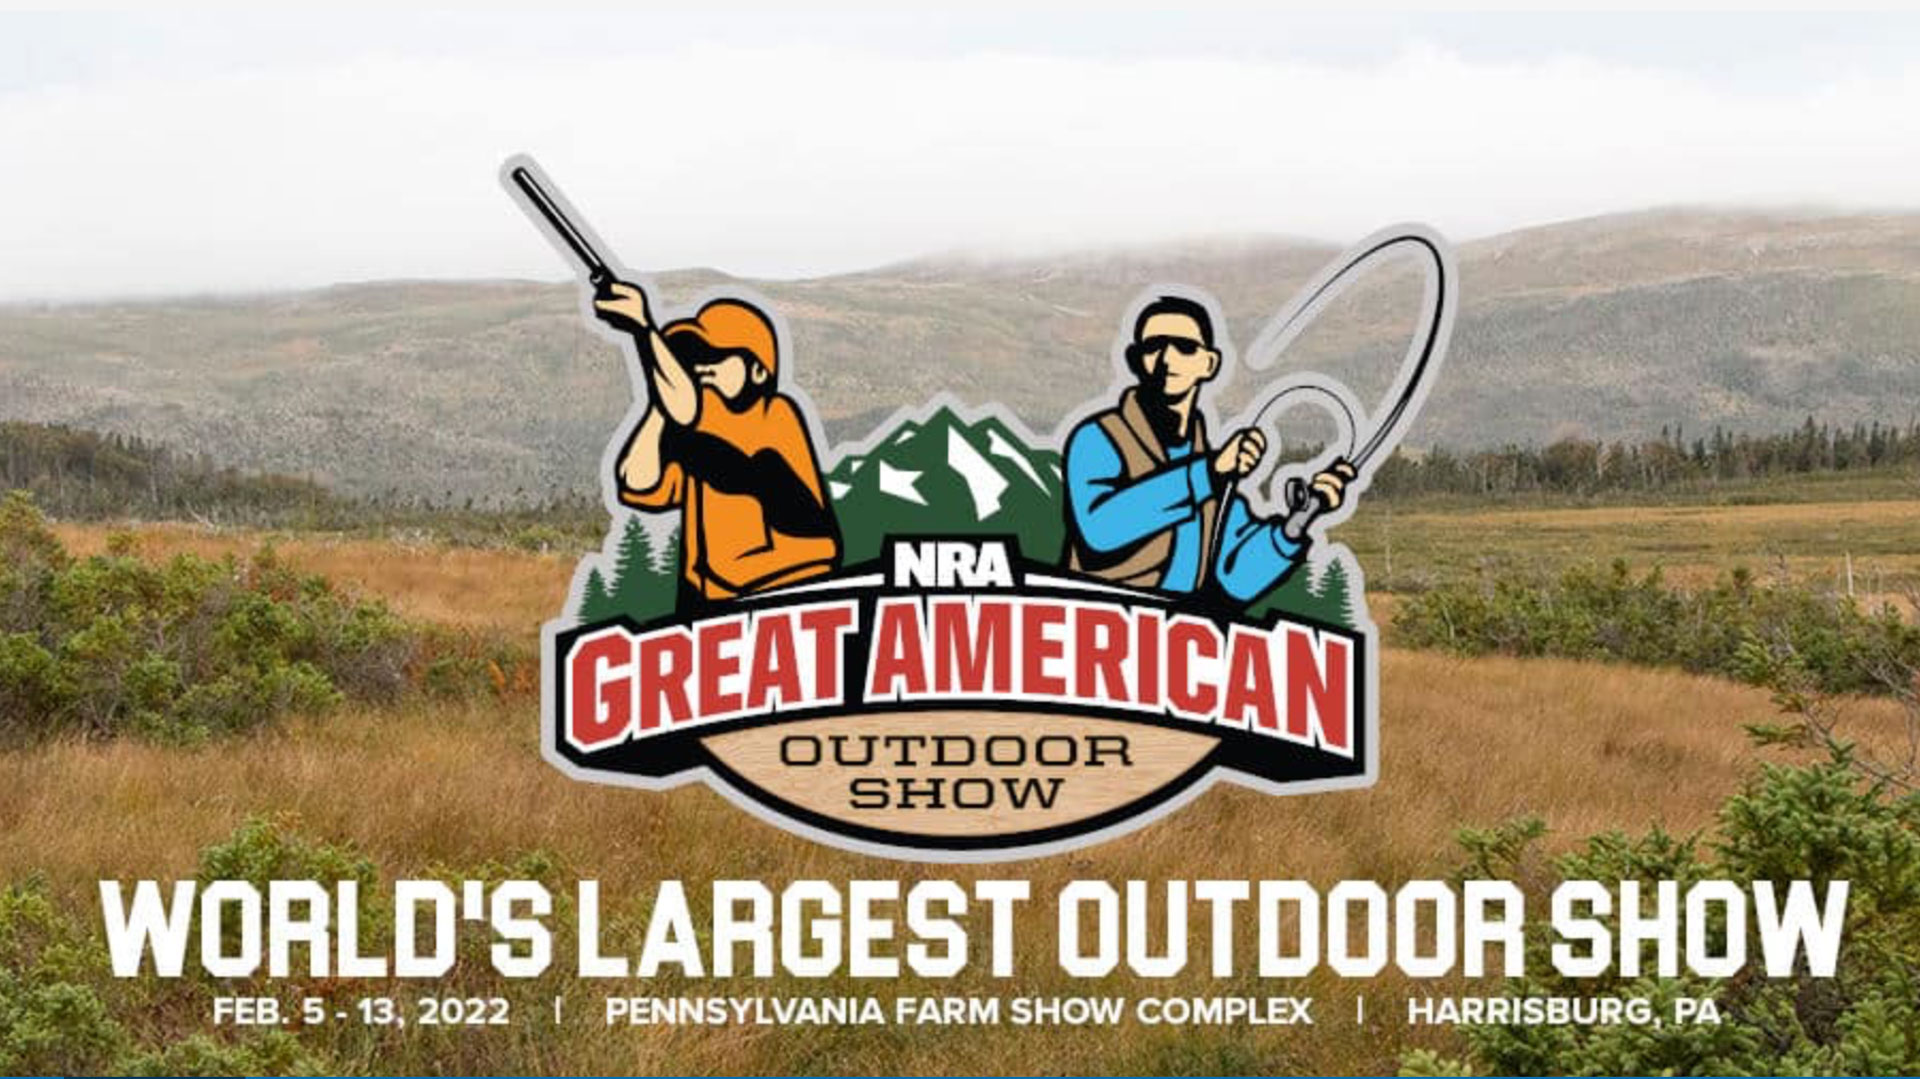 NRA Women NRA's Great American Outdoor Show Returns to Pennsylvania